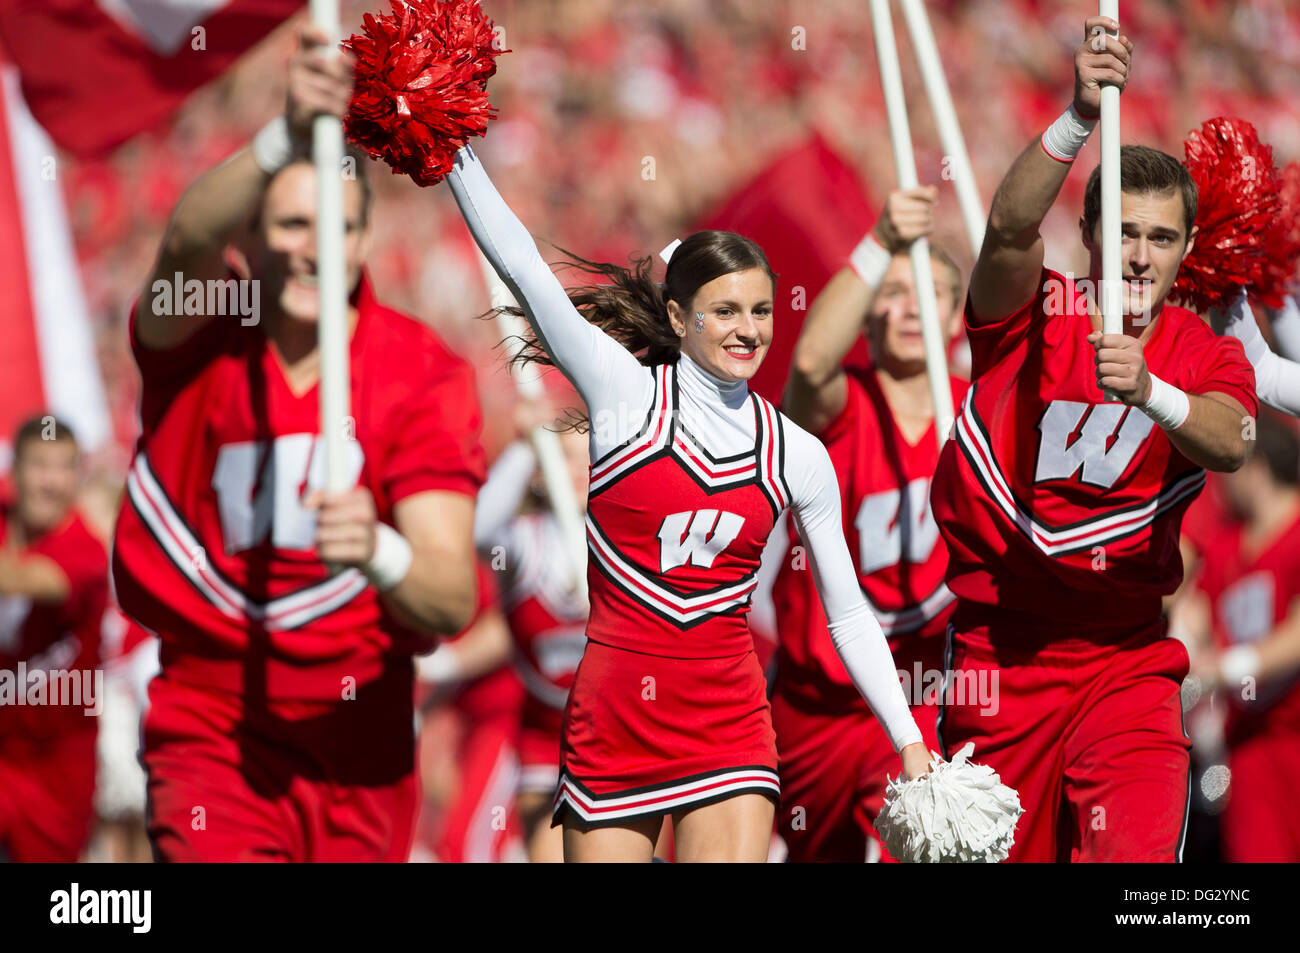 Madison, Wisconsin, USA. 12th Oct, 2013. October 12, 2013: A Wisconsin Badgers cheerleader runs onto the field ahead of the team prior to the start of the NCAA Football game between the Northwestern Wildcats and the Wisconsin Badgers at Camp Randall Stadium in Madison, WI. Wisconsin defeated Northwestern 35-6. John Fisher/CSM/Alamy Live News Stock Photo